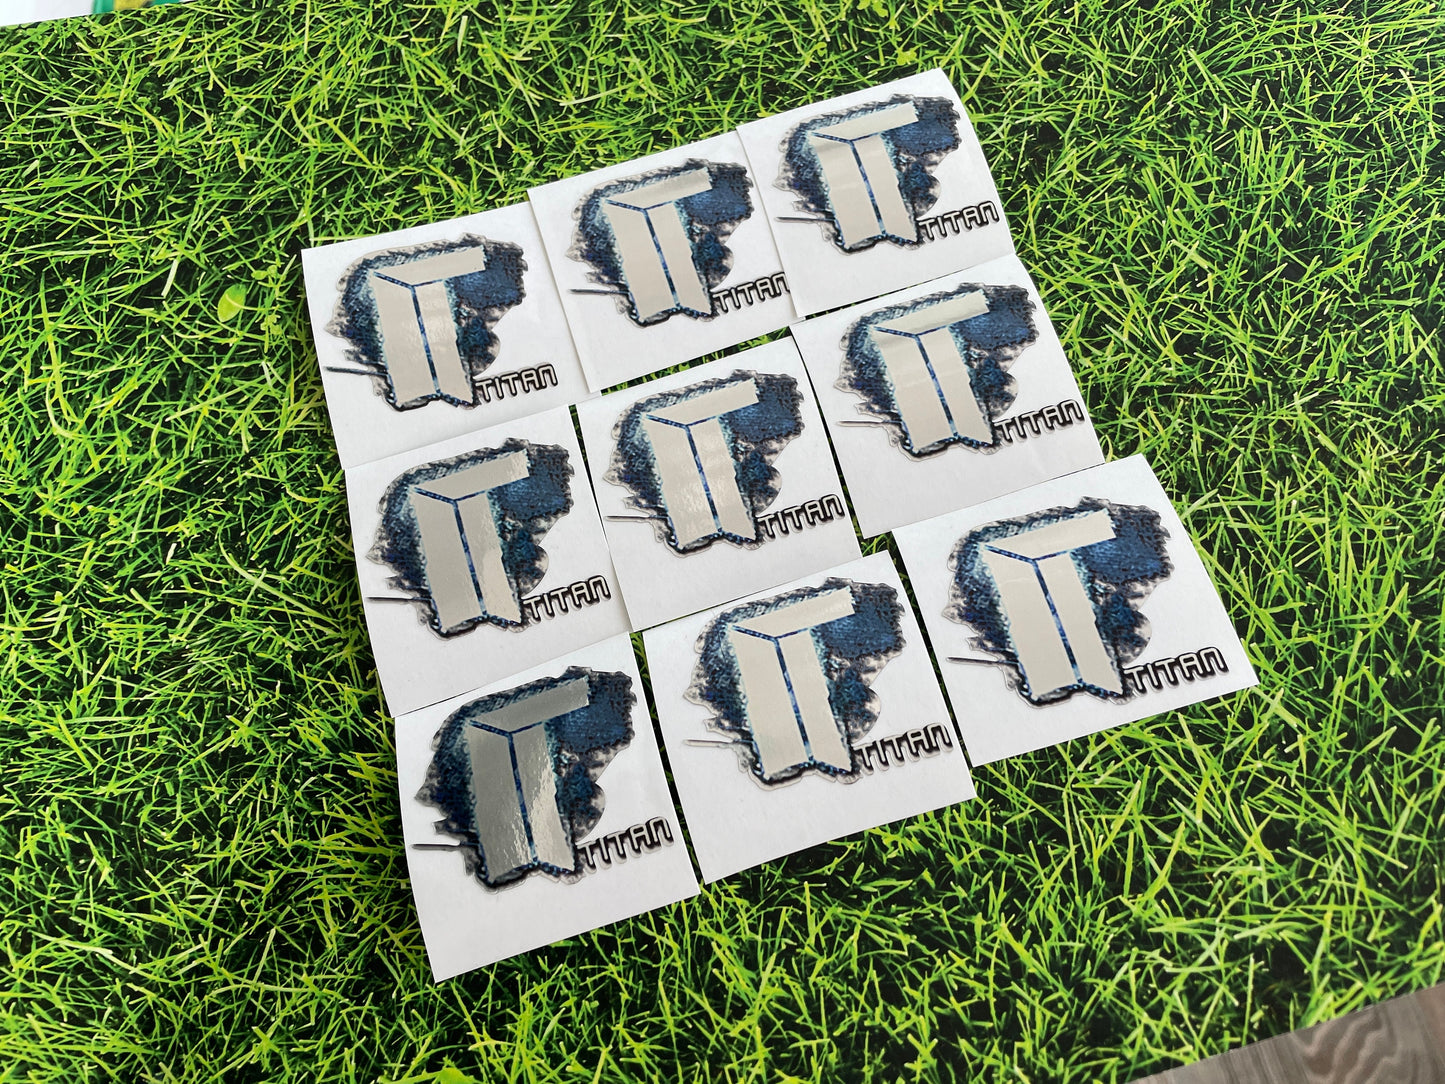 X9 Titan Holo/Foil Katowice 2014 Stickers from CS GO in real life Set  / Global Offensive decal / Sticker / Decal / Gaming / csgo Gamer Gift